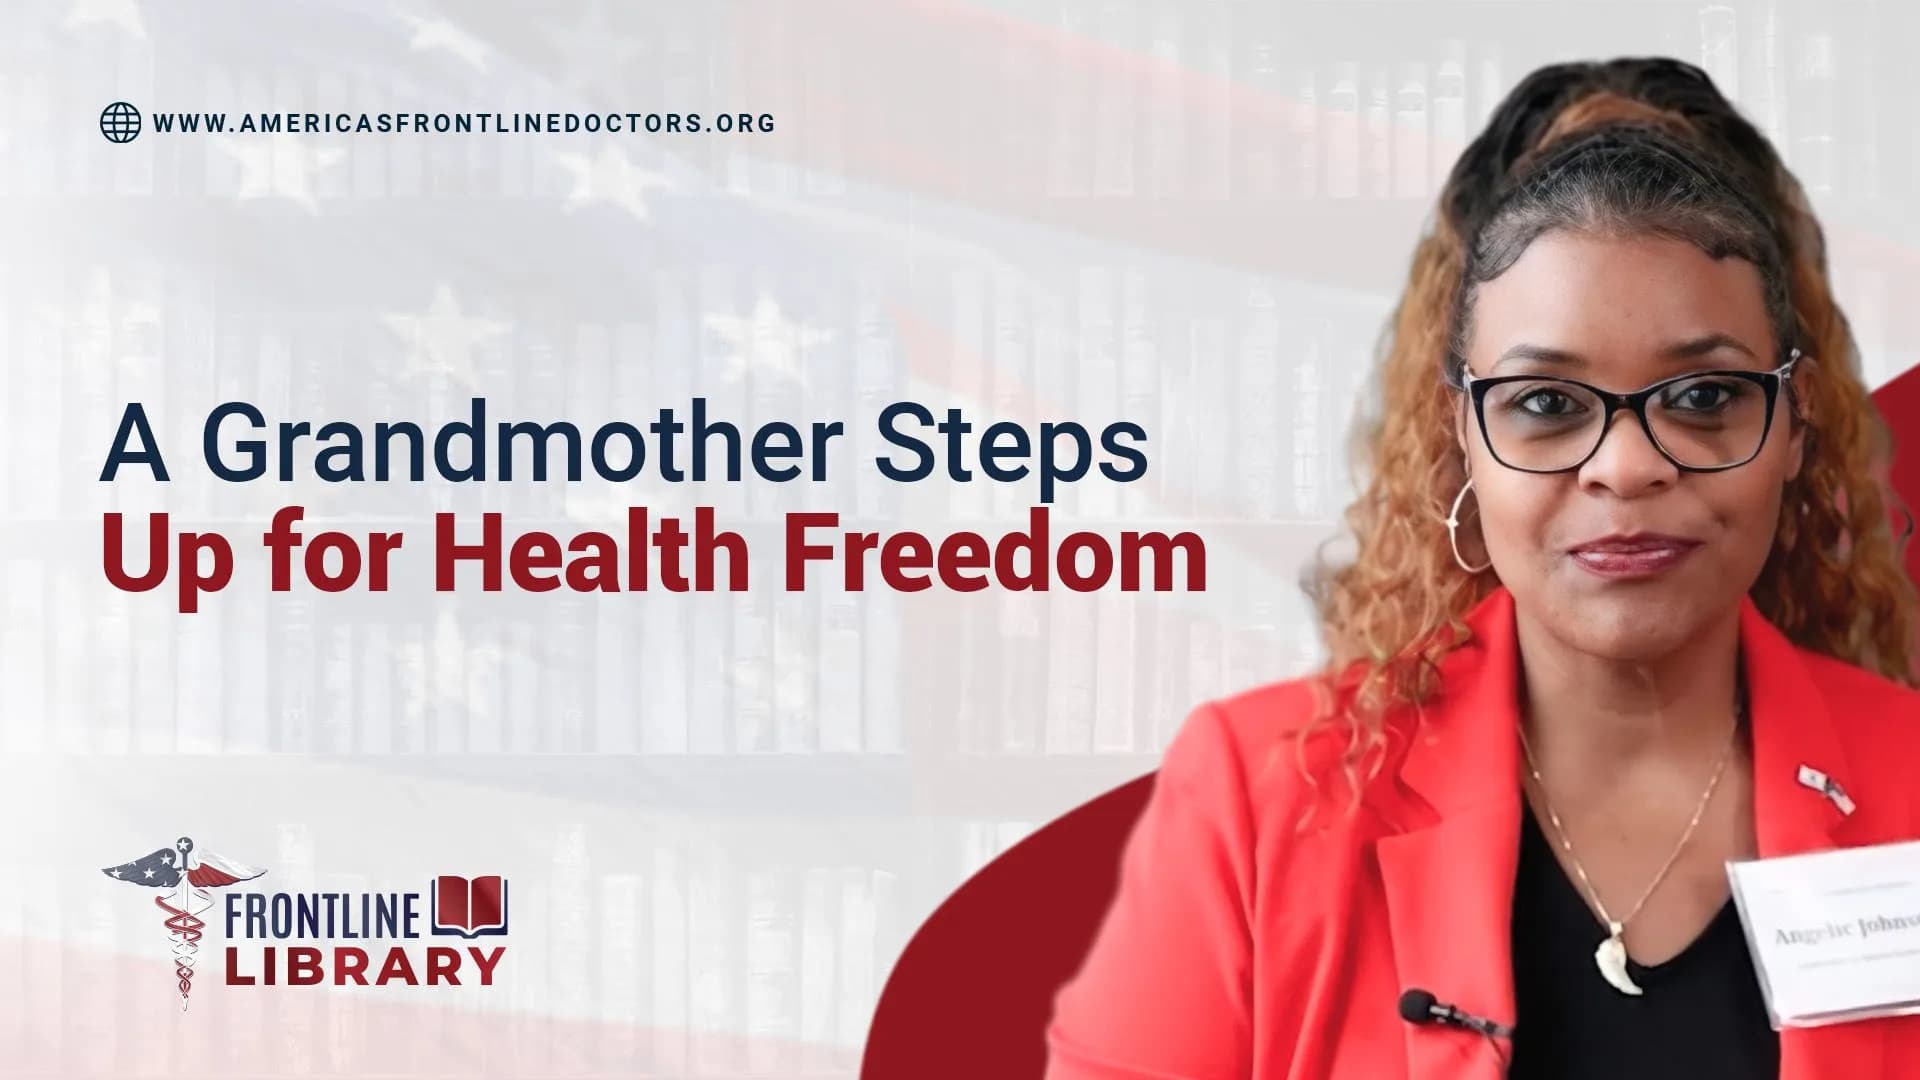 A Grandmother Steps Up for Health Freedom